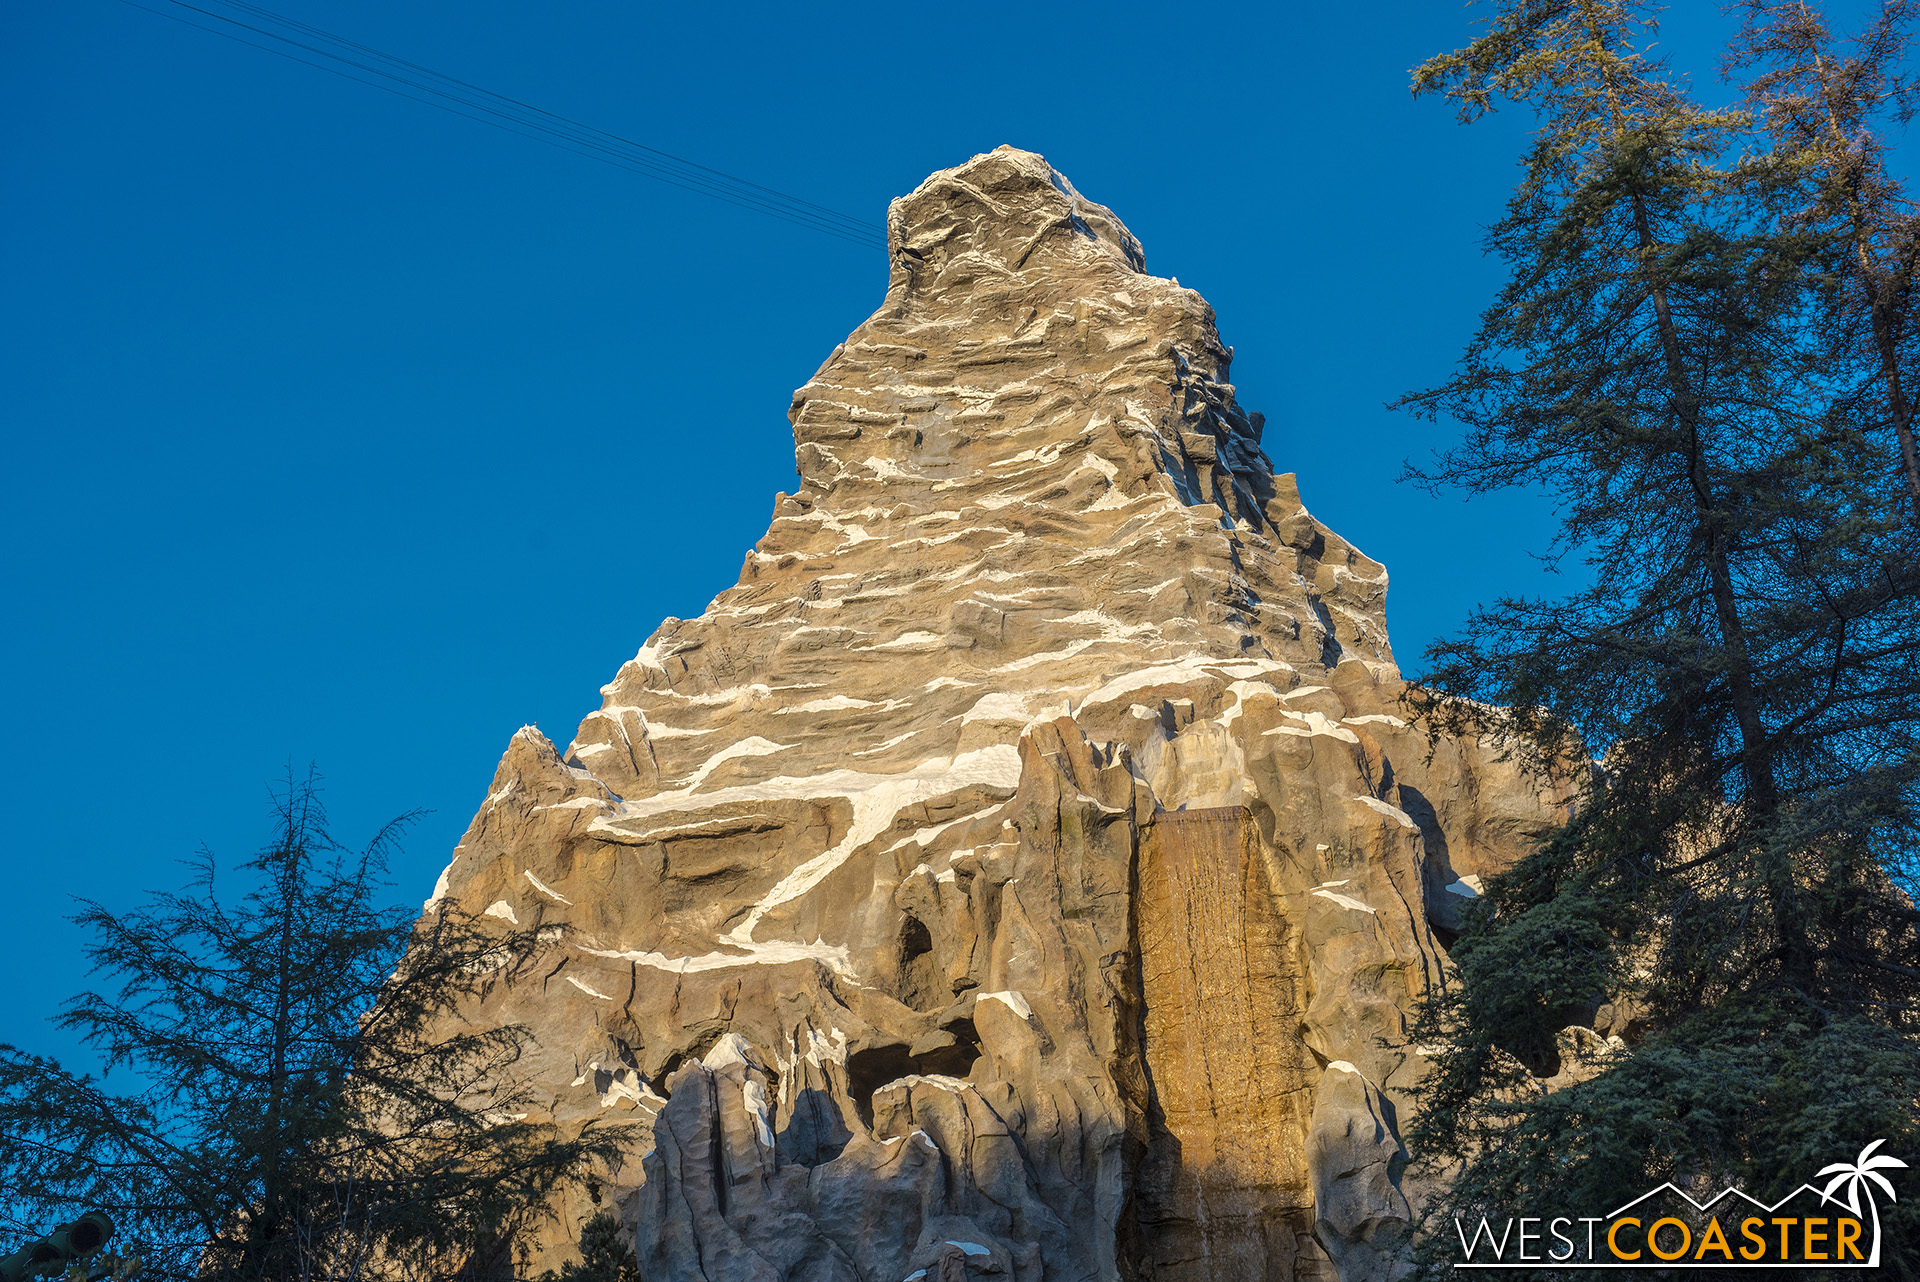  The snow levels dropped pretty far down, and many places reported snow that normally don’t get snow.  In fact, even the Matterhorn got a light dusting! 